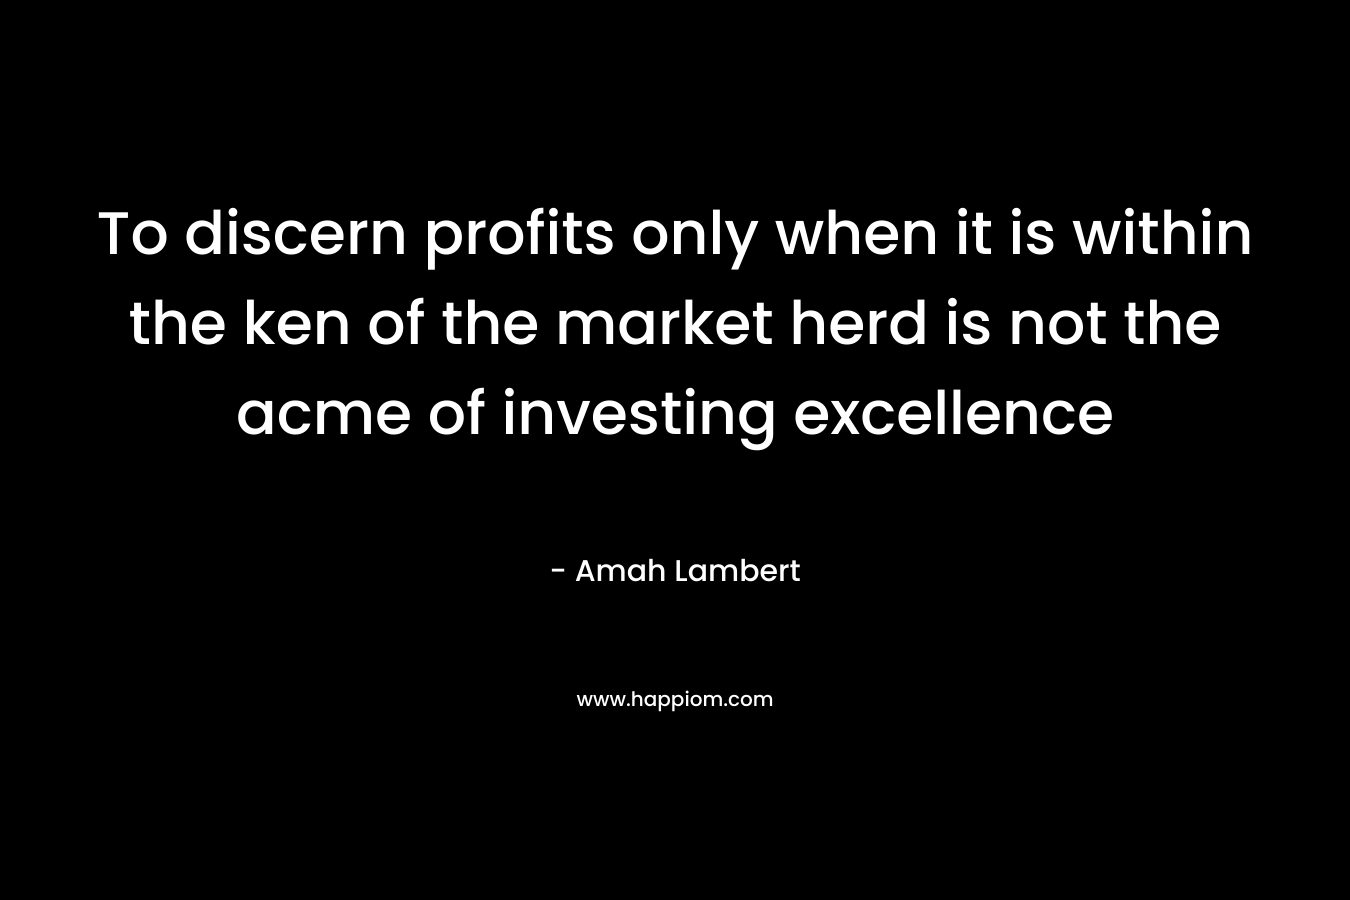 To discern profits only when it is within the ken of the market herd is not the acme of investing excellence